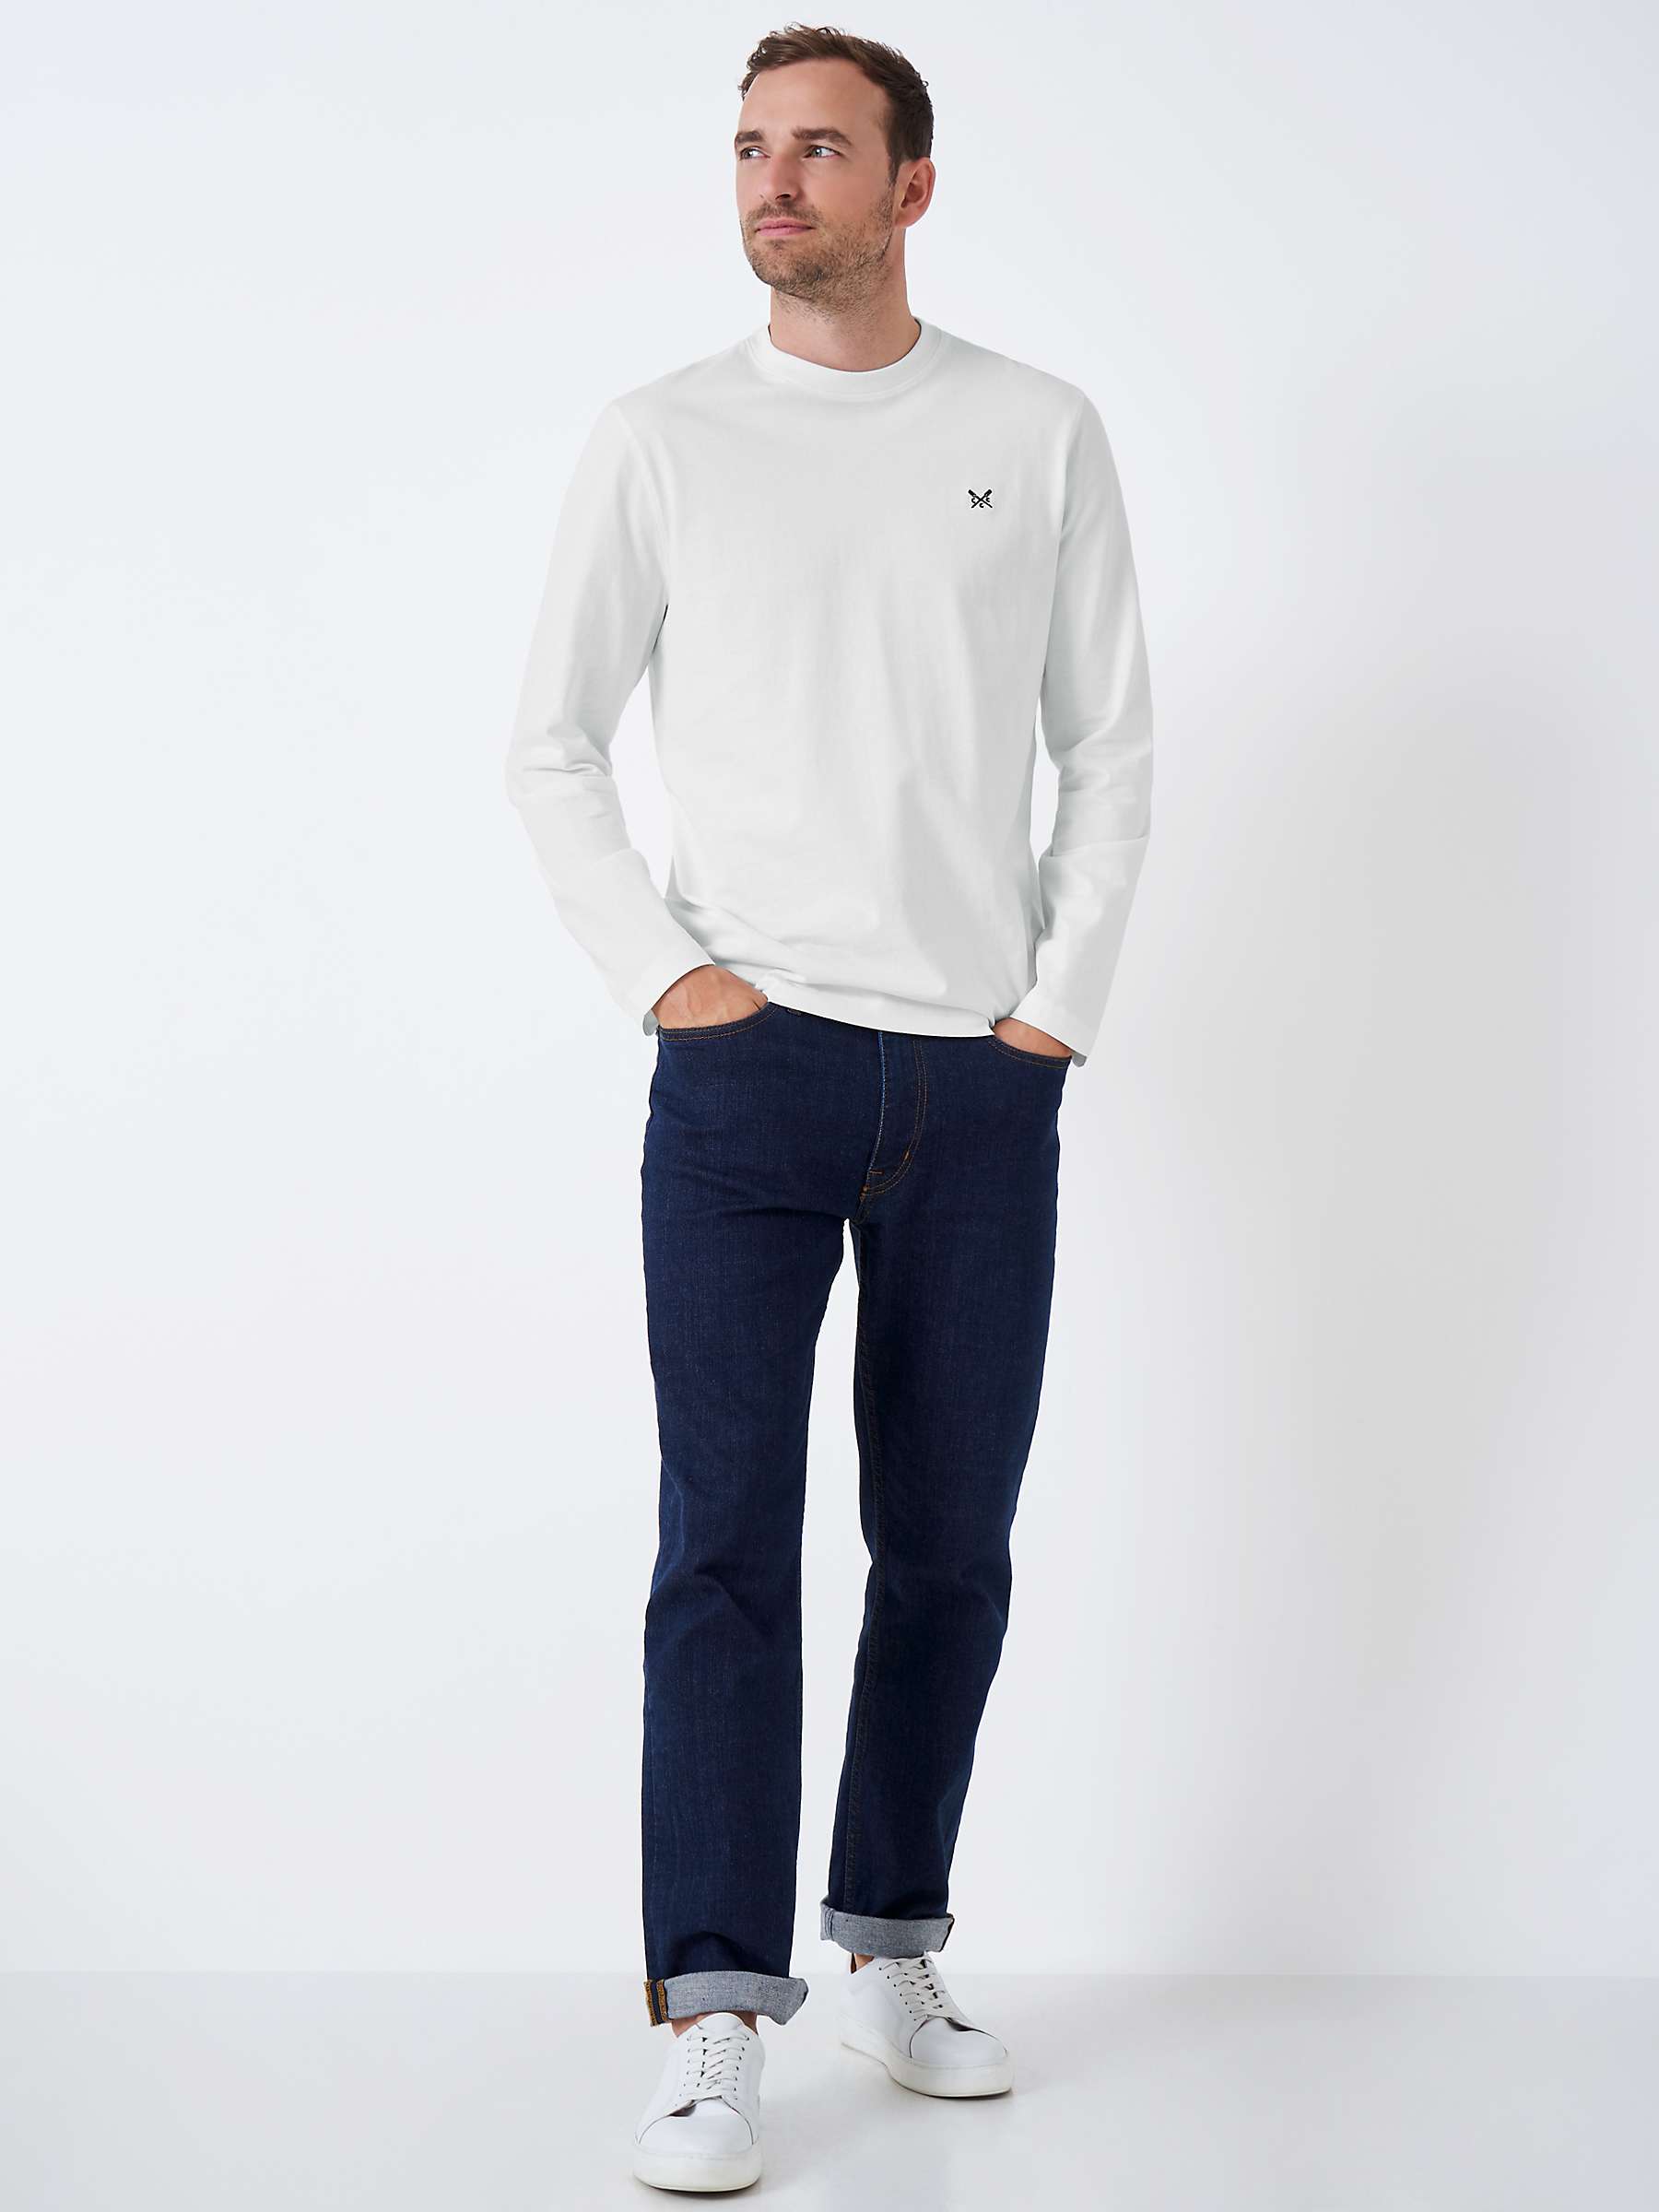 Buy Crew Clothing Long Sleeve T-Shirt Online at johnlewis.com